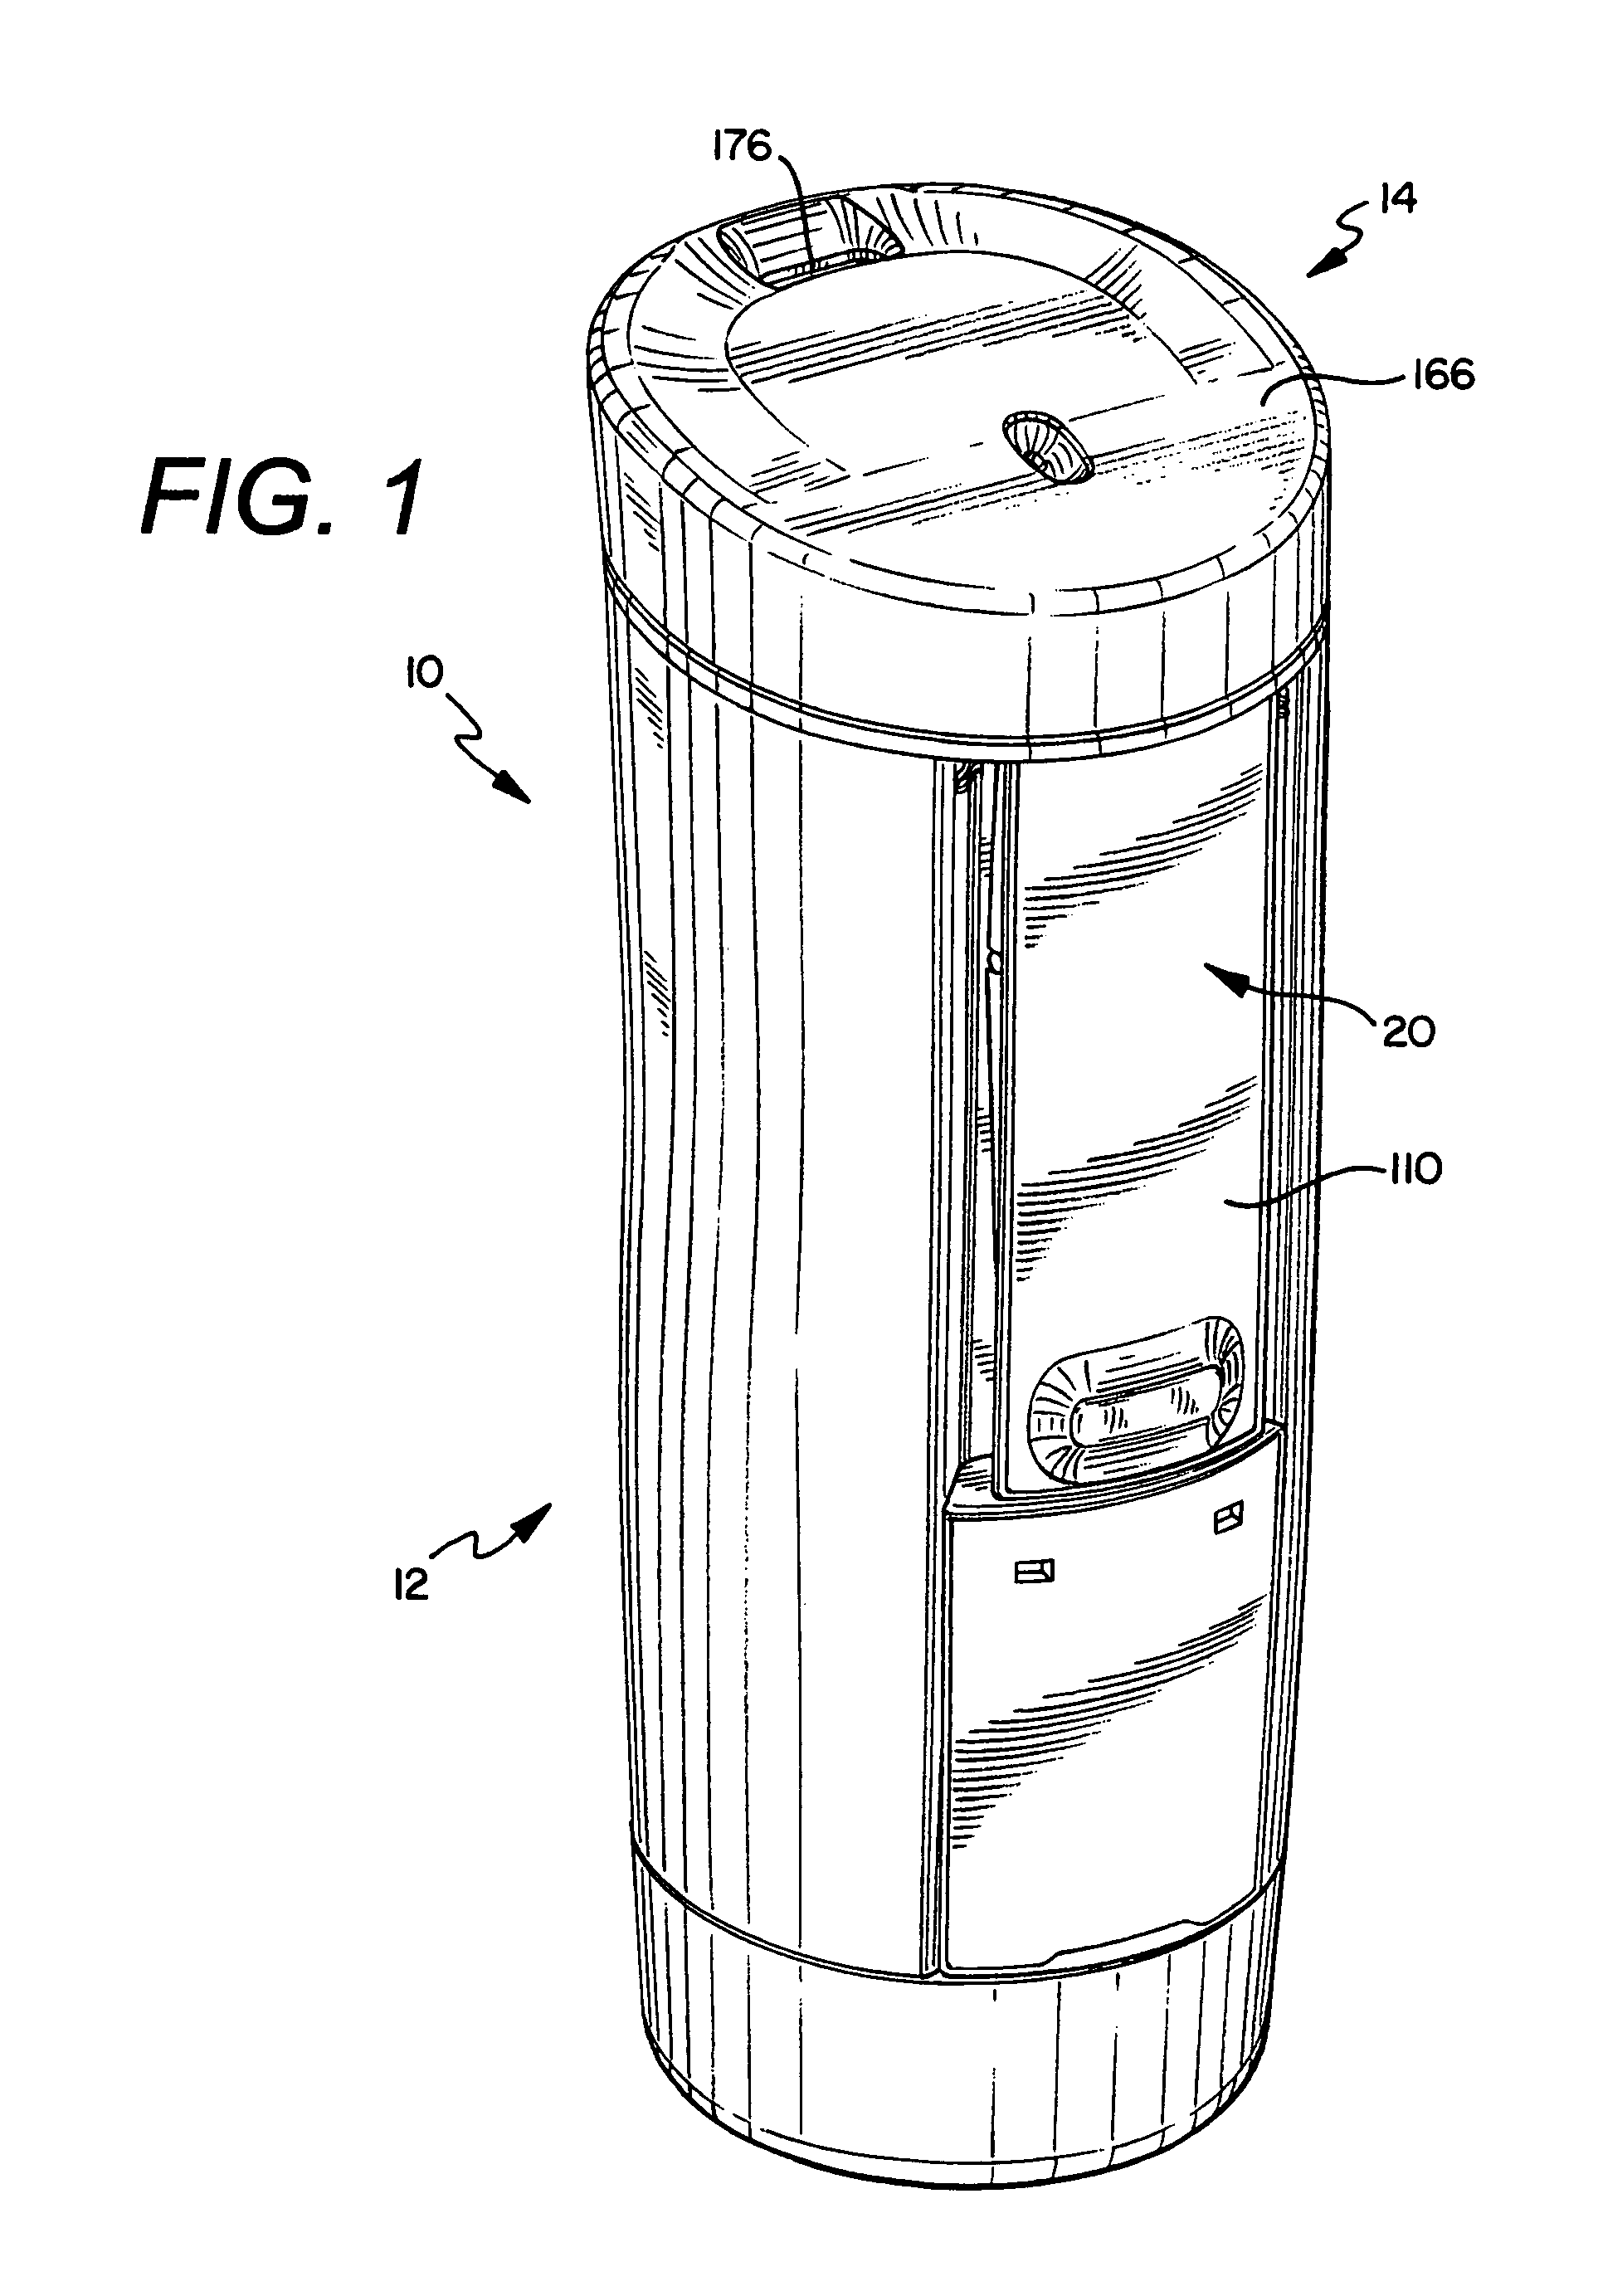 Travel Container Having Drinking Orifice and Vent Aperture